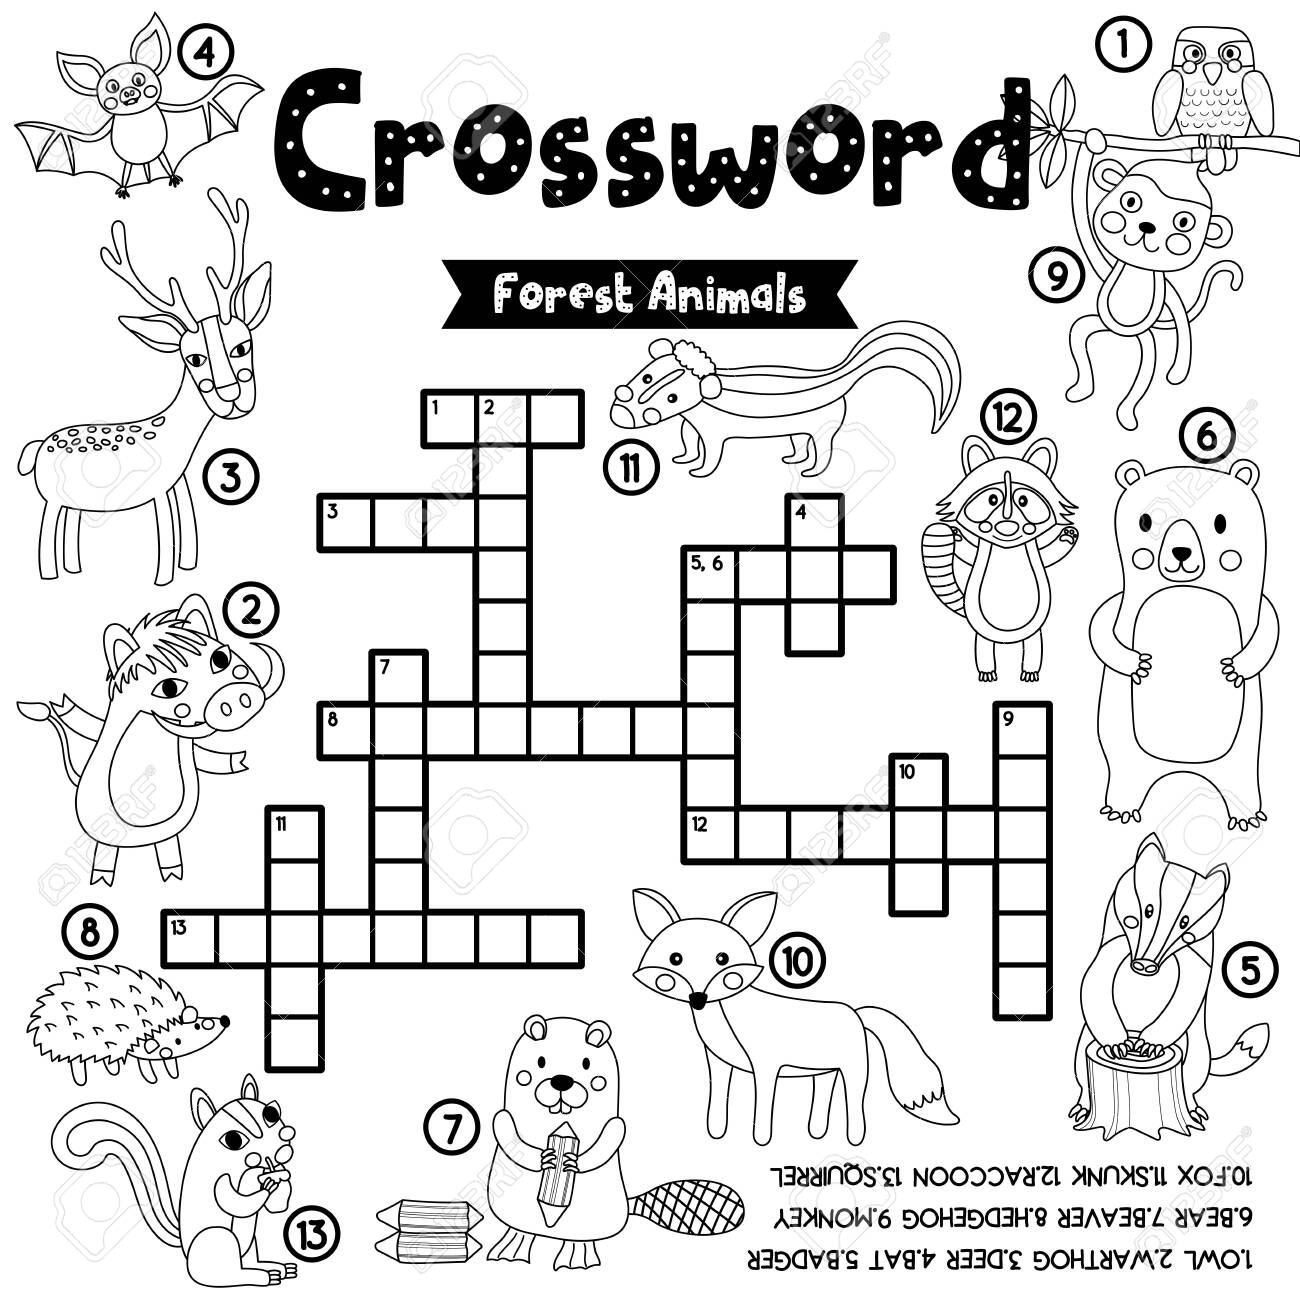 Crosswords puzzle game of forest animals for preschool kids activity worksheet coloring printable version vector illustration royalty free svg cliparts vectors and stock illustration image